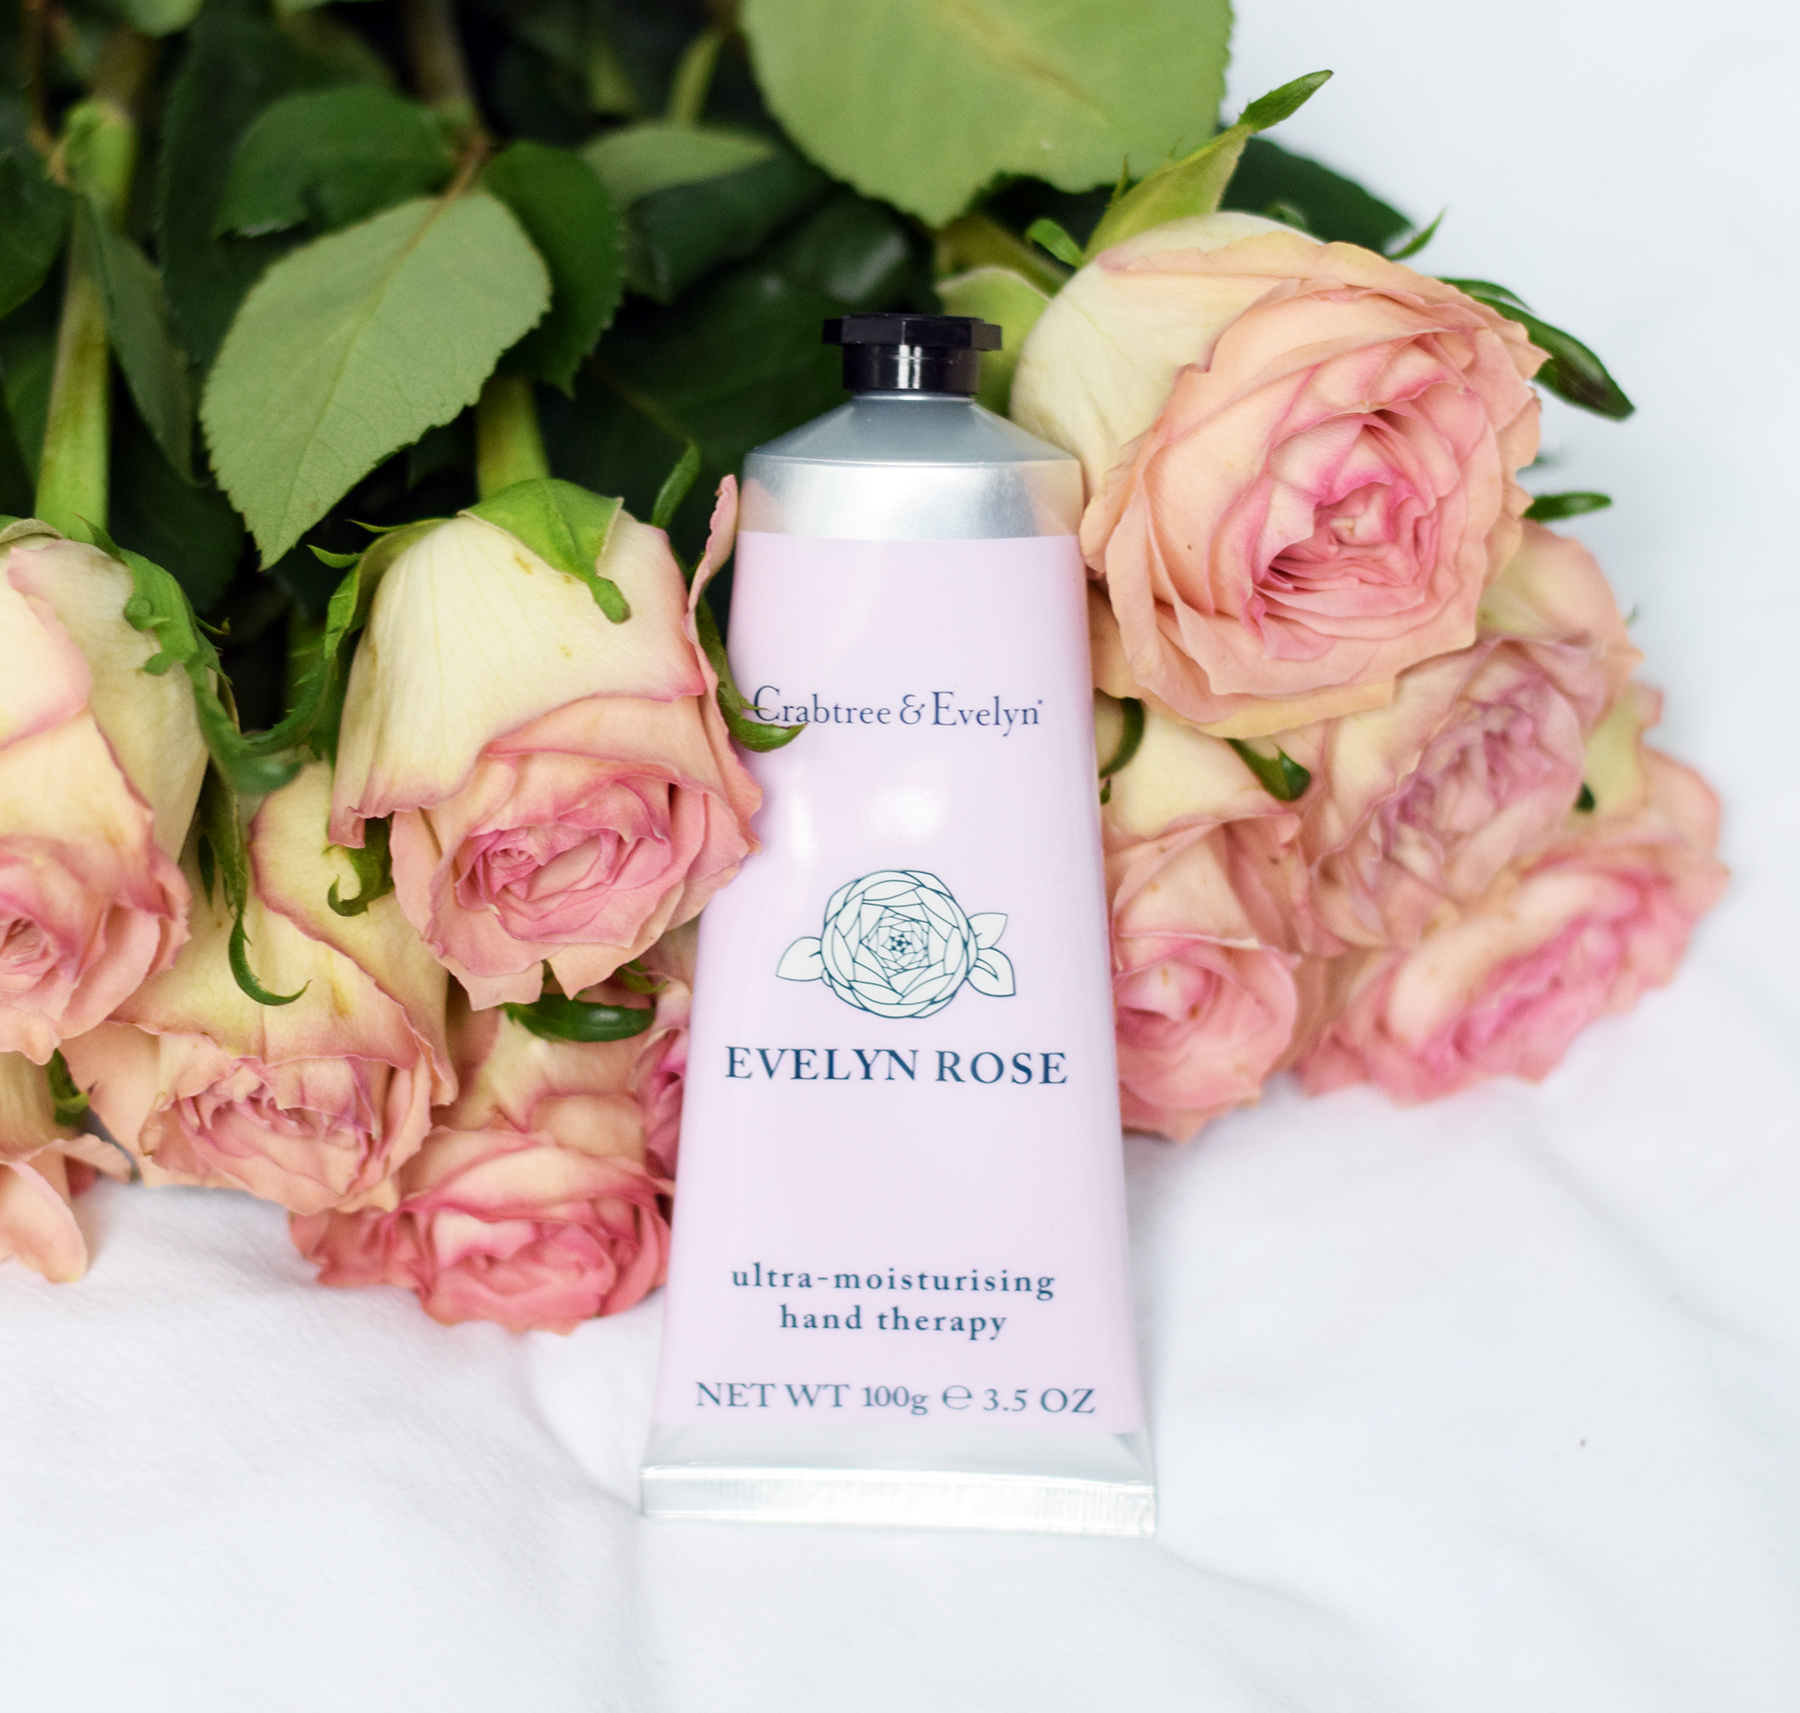 Crabtree & Evelyn Evelyn Rose Hand Therapy